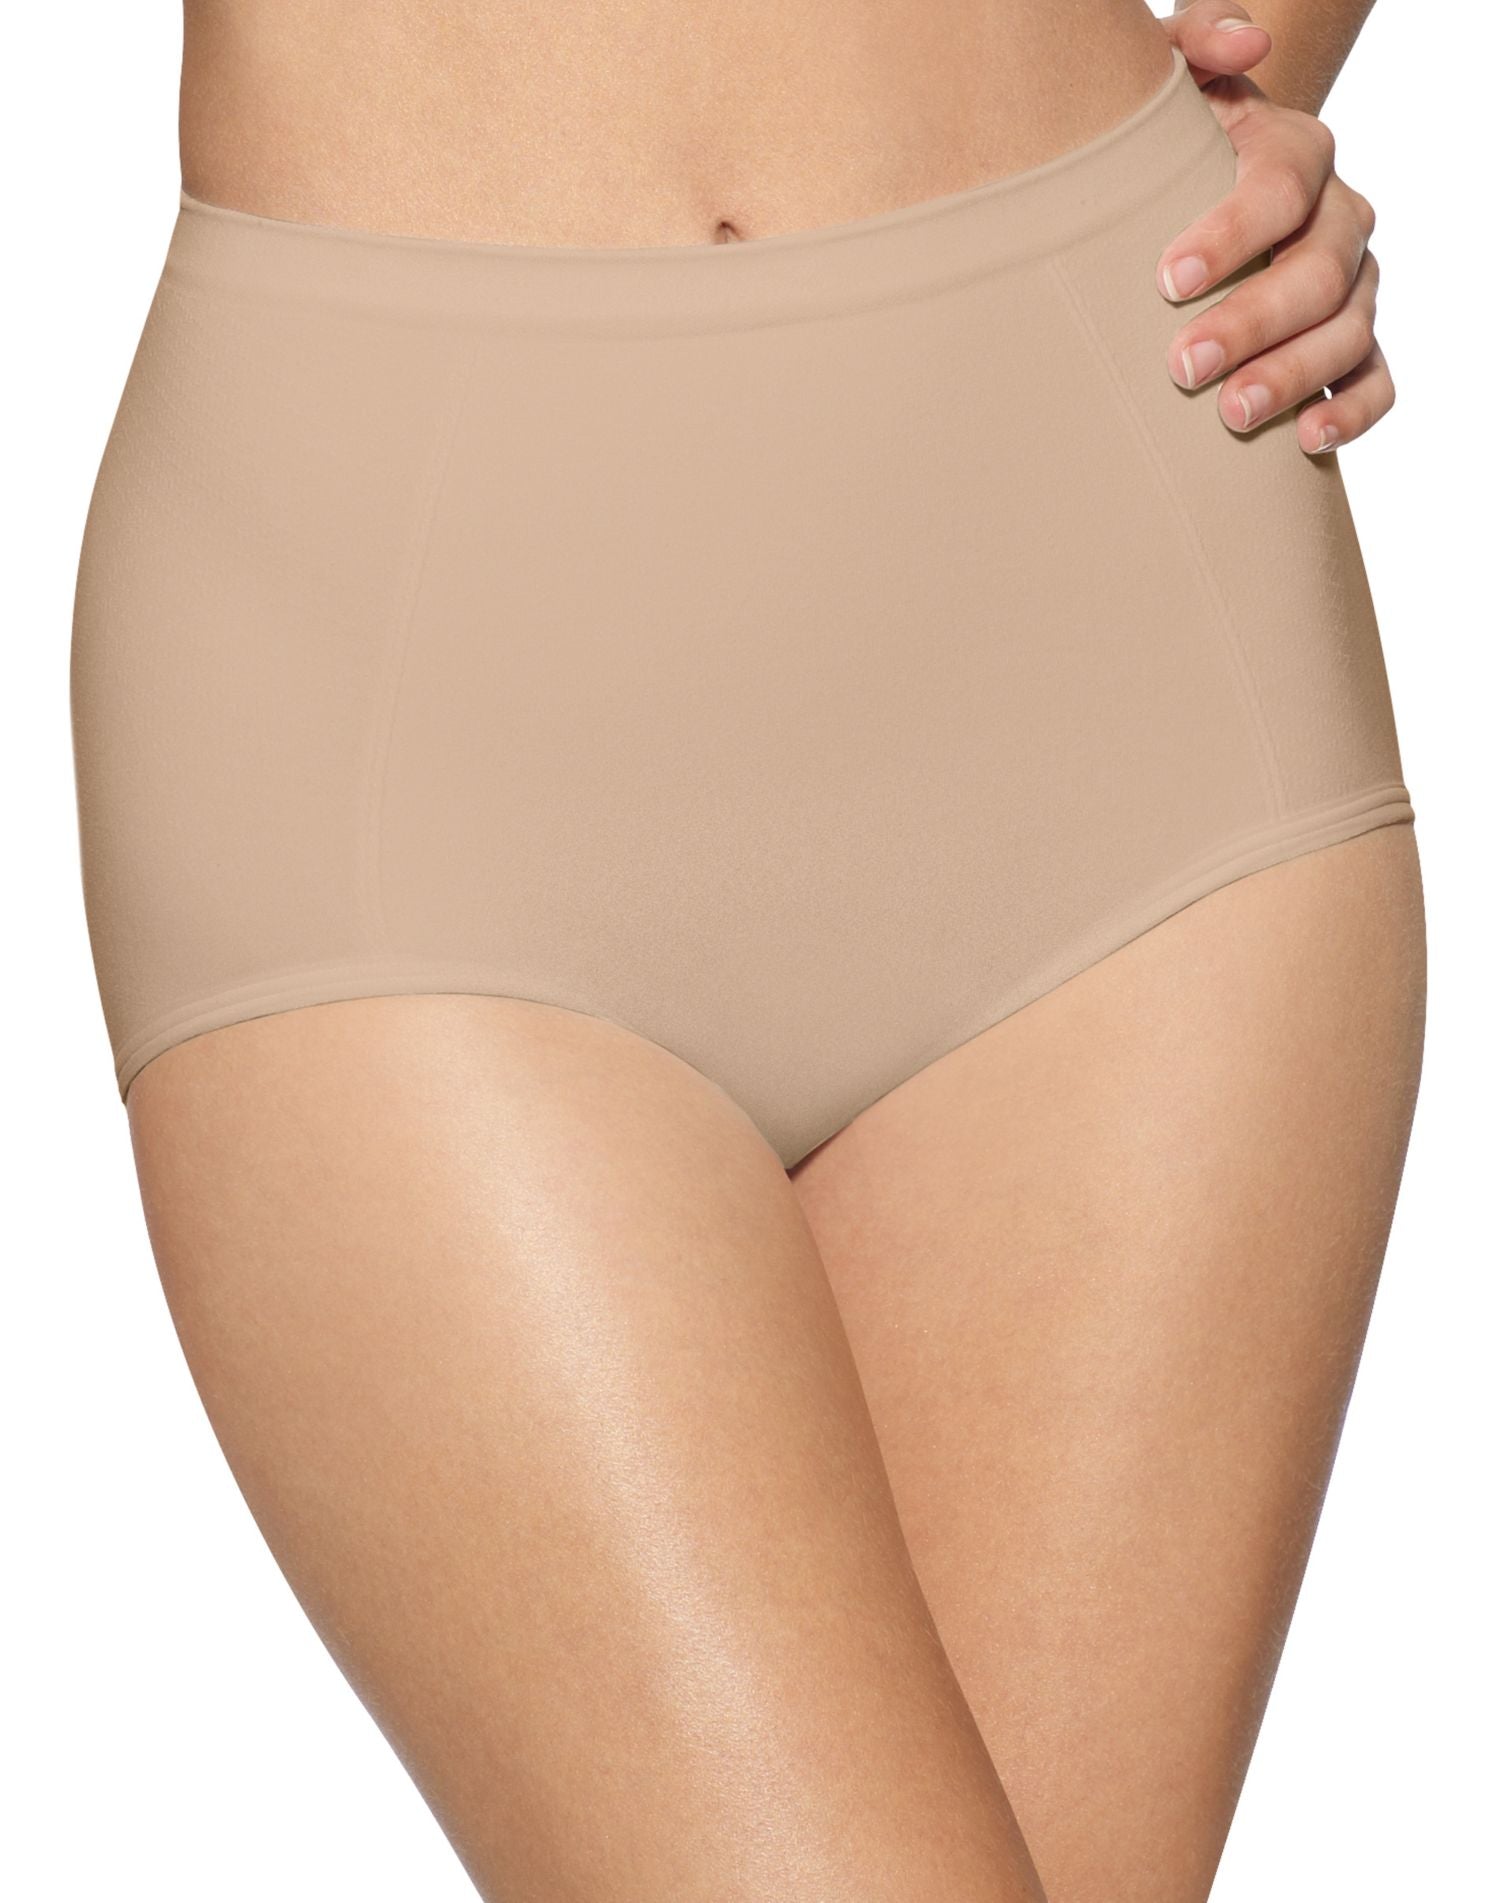 X245 - Bali Seamless Extra Firm Control Brief Shaper 2 Pack